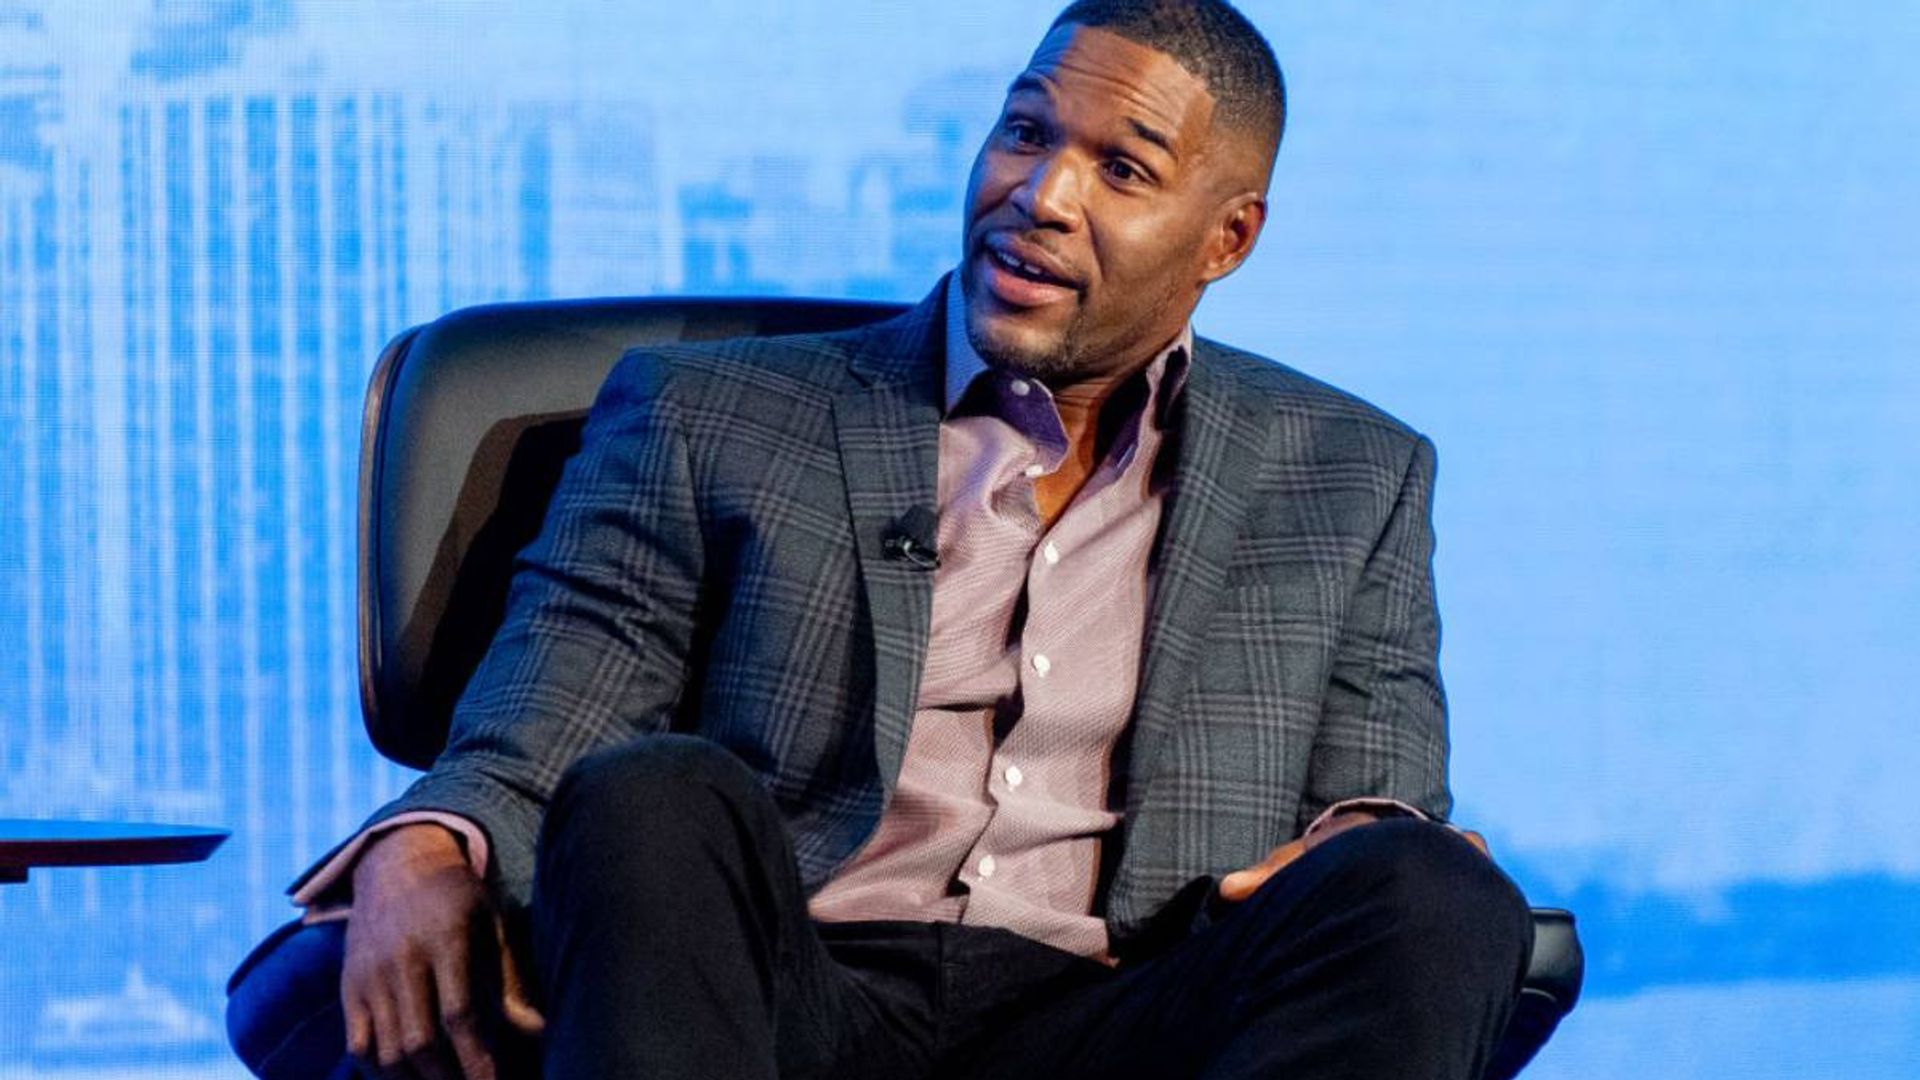 Michael Strahan looks shocked during interview on TV